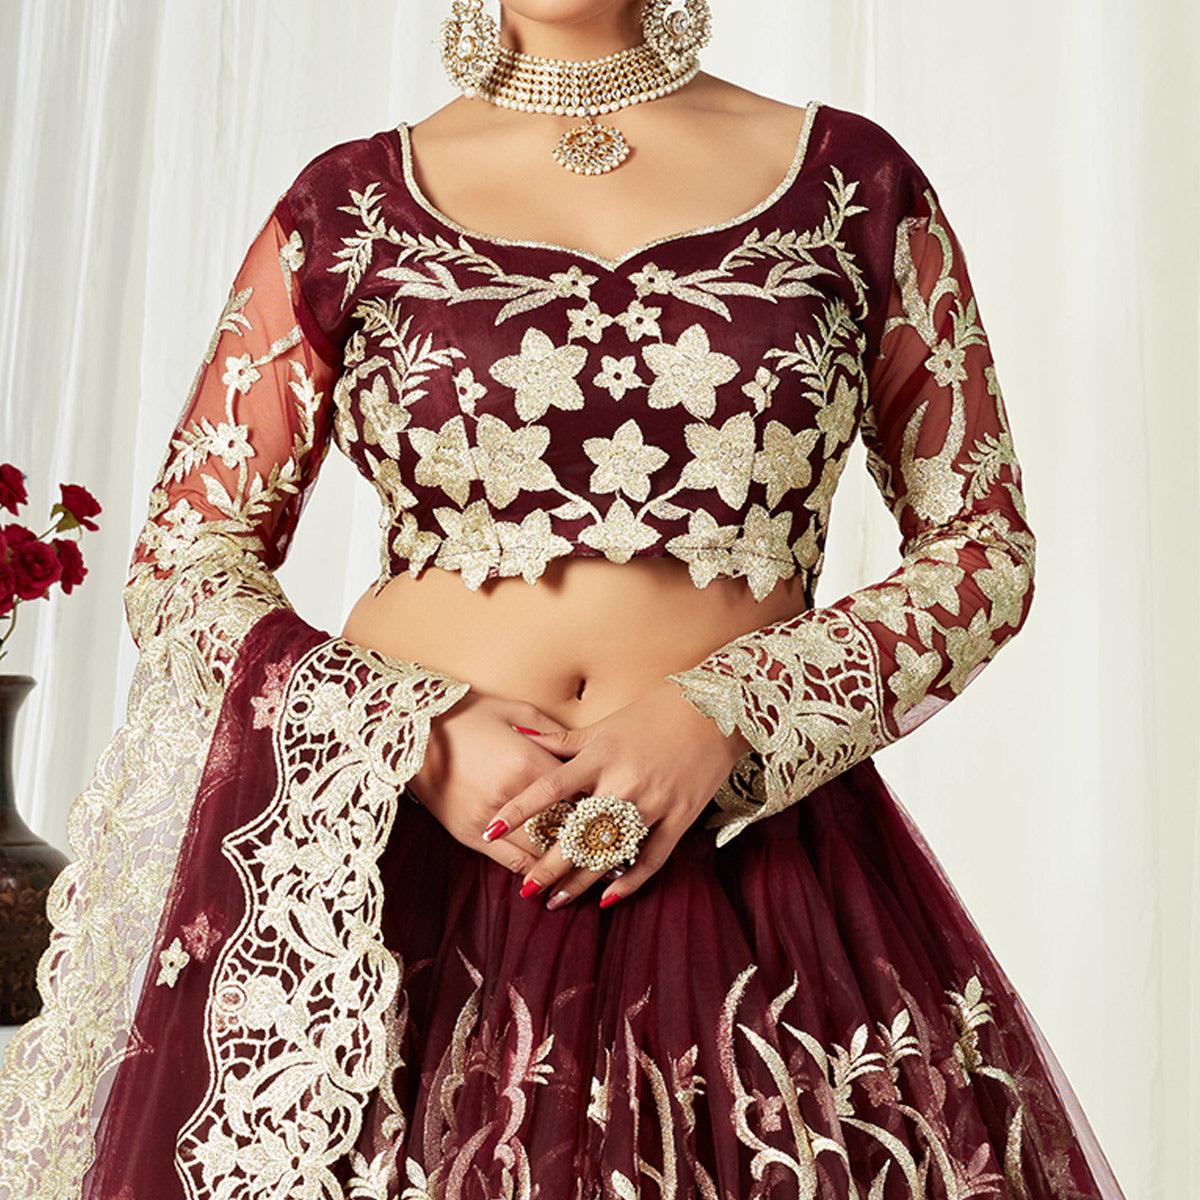 Entrancing Maroon Colored Wedding Wear Butterfly Net With Embroidered Lehenga Choli - Peachmode